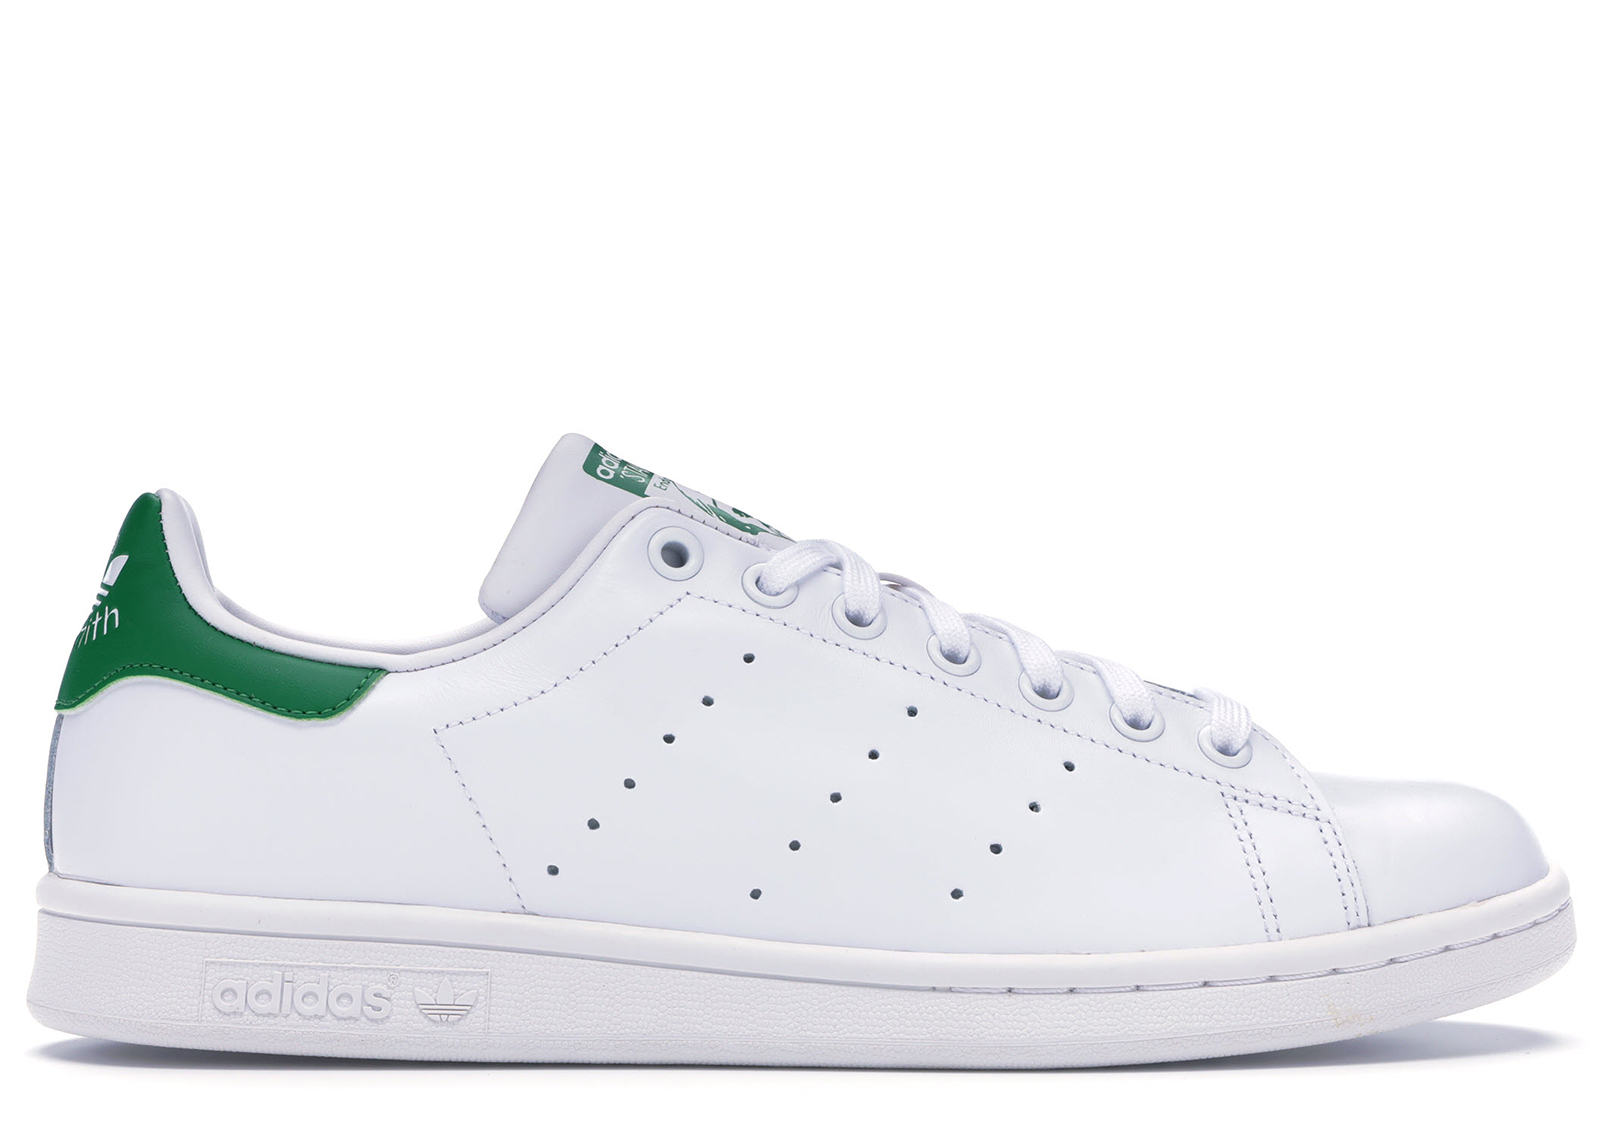 adidas originals white and green stan smith sneakers